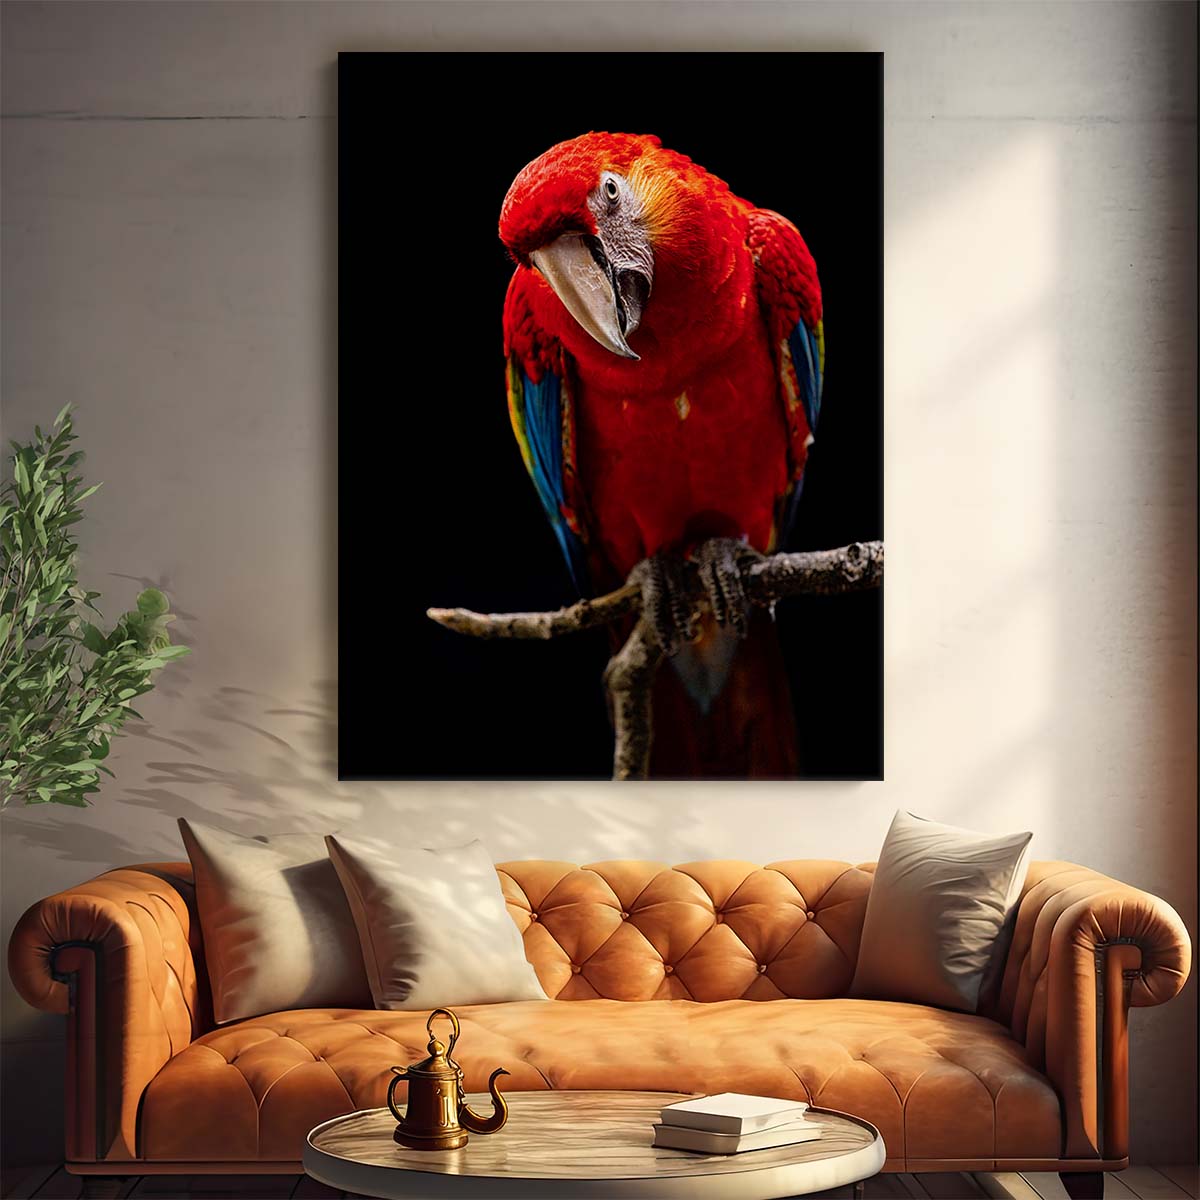 Colorful Scarlet Macaw Parrot Photography Wall Art, Dark Background by Luxuriance Designs, made in USA